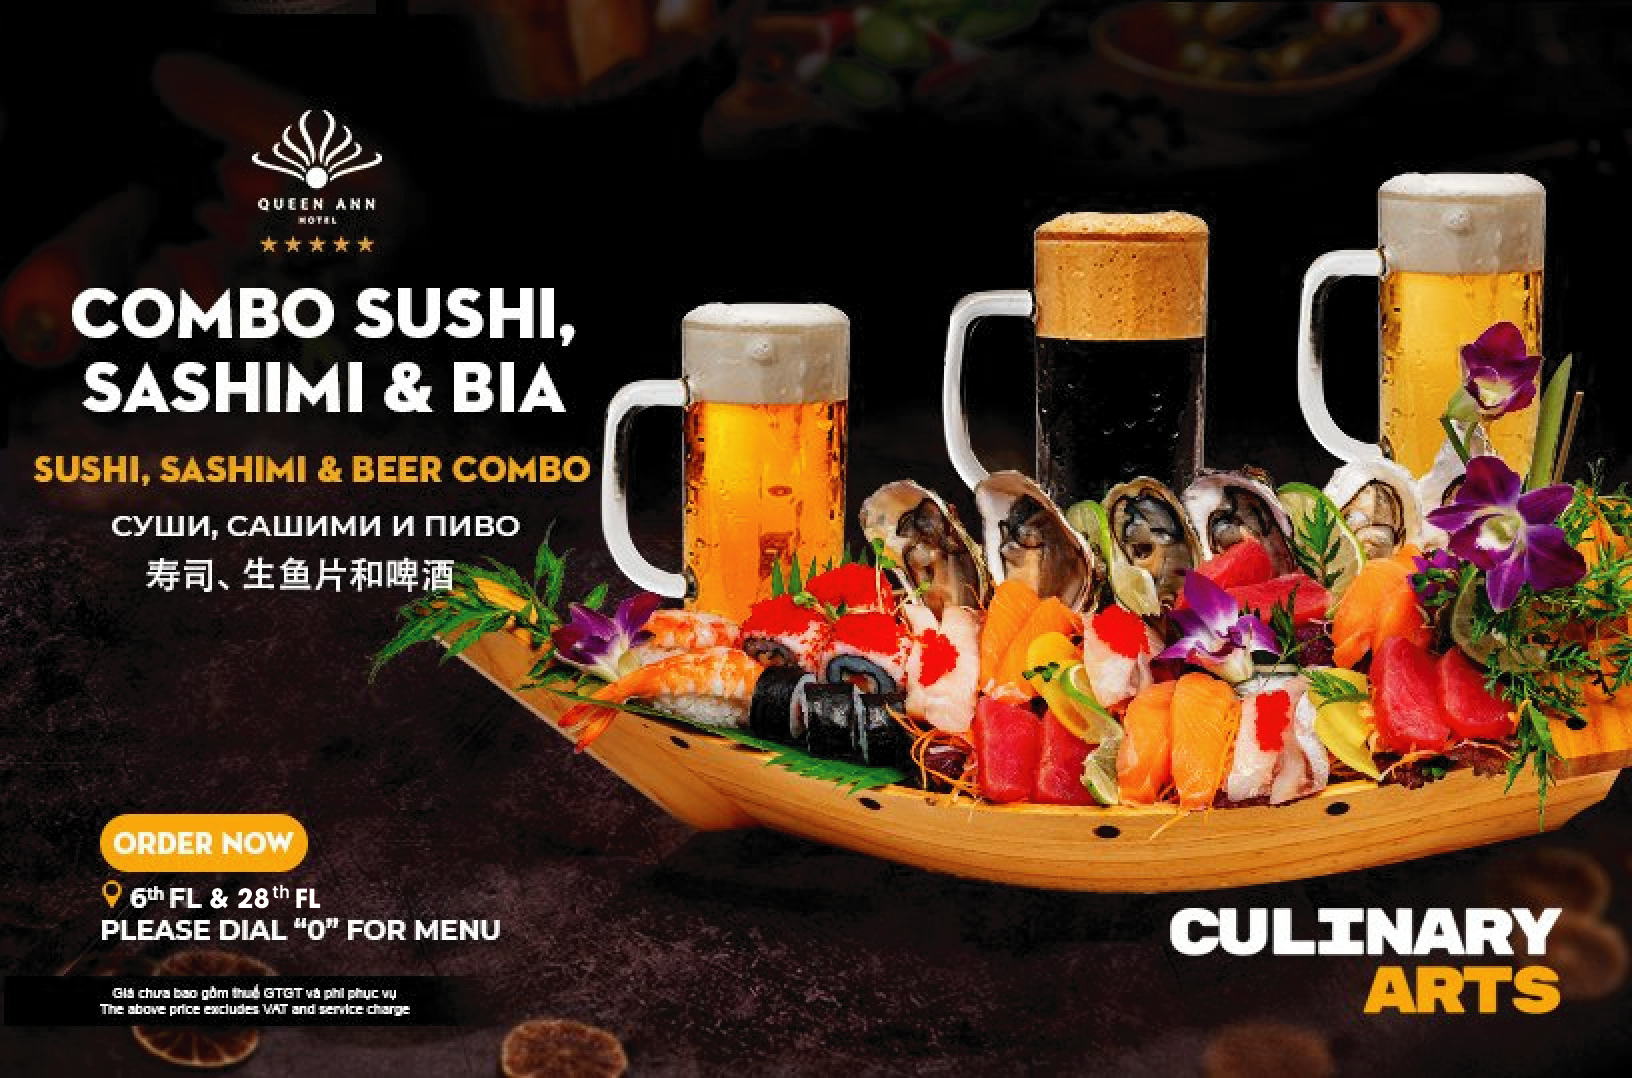 EXPERIENCE THE PERFECTLY DELICIOUS FLAVOR WITH THE SASHIMI & RENOWNED FRESH BEER COMBO